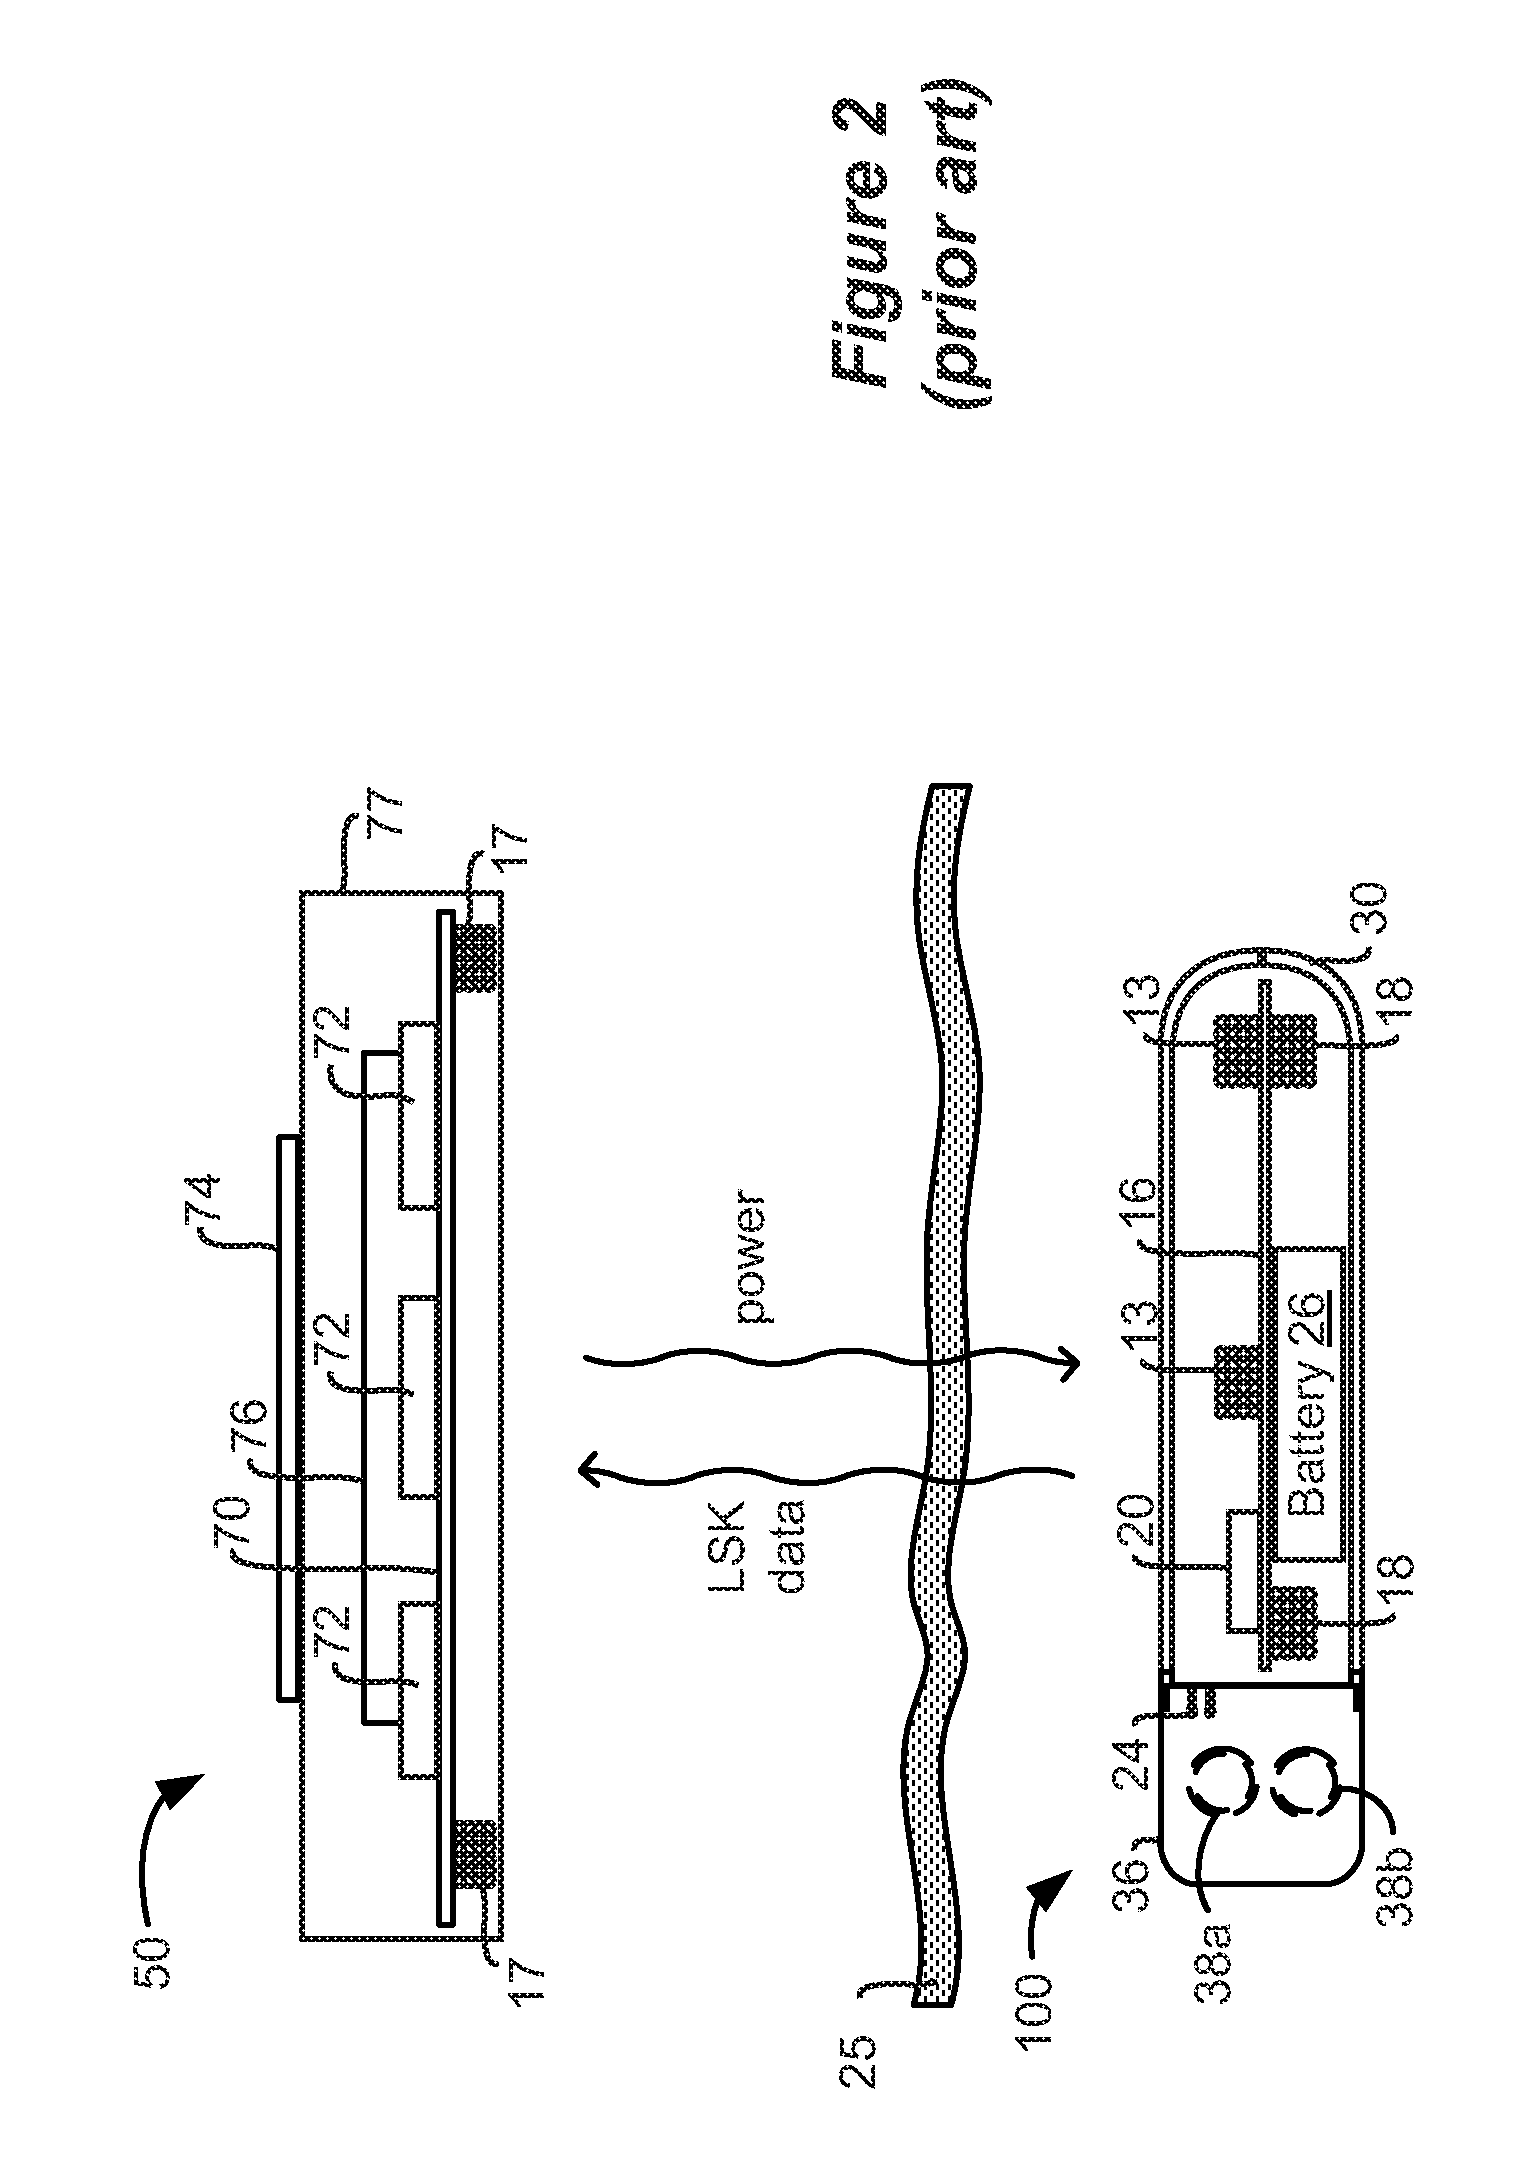 Charger Alignment in an Implantable Medical Device System Employing Reflected Impedance Modulation